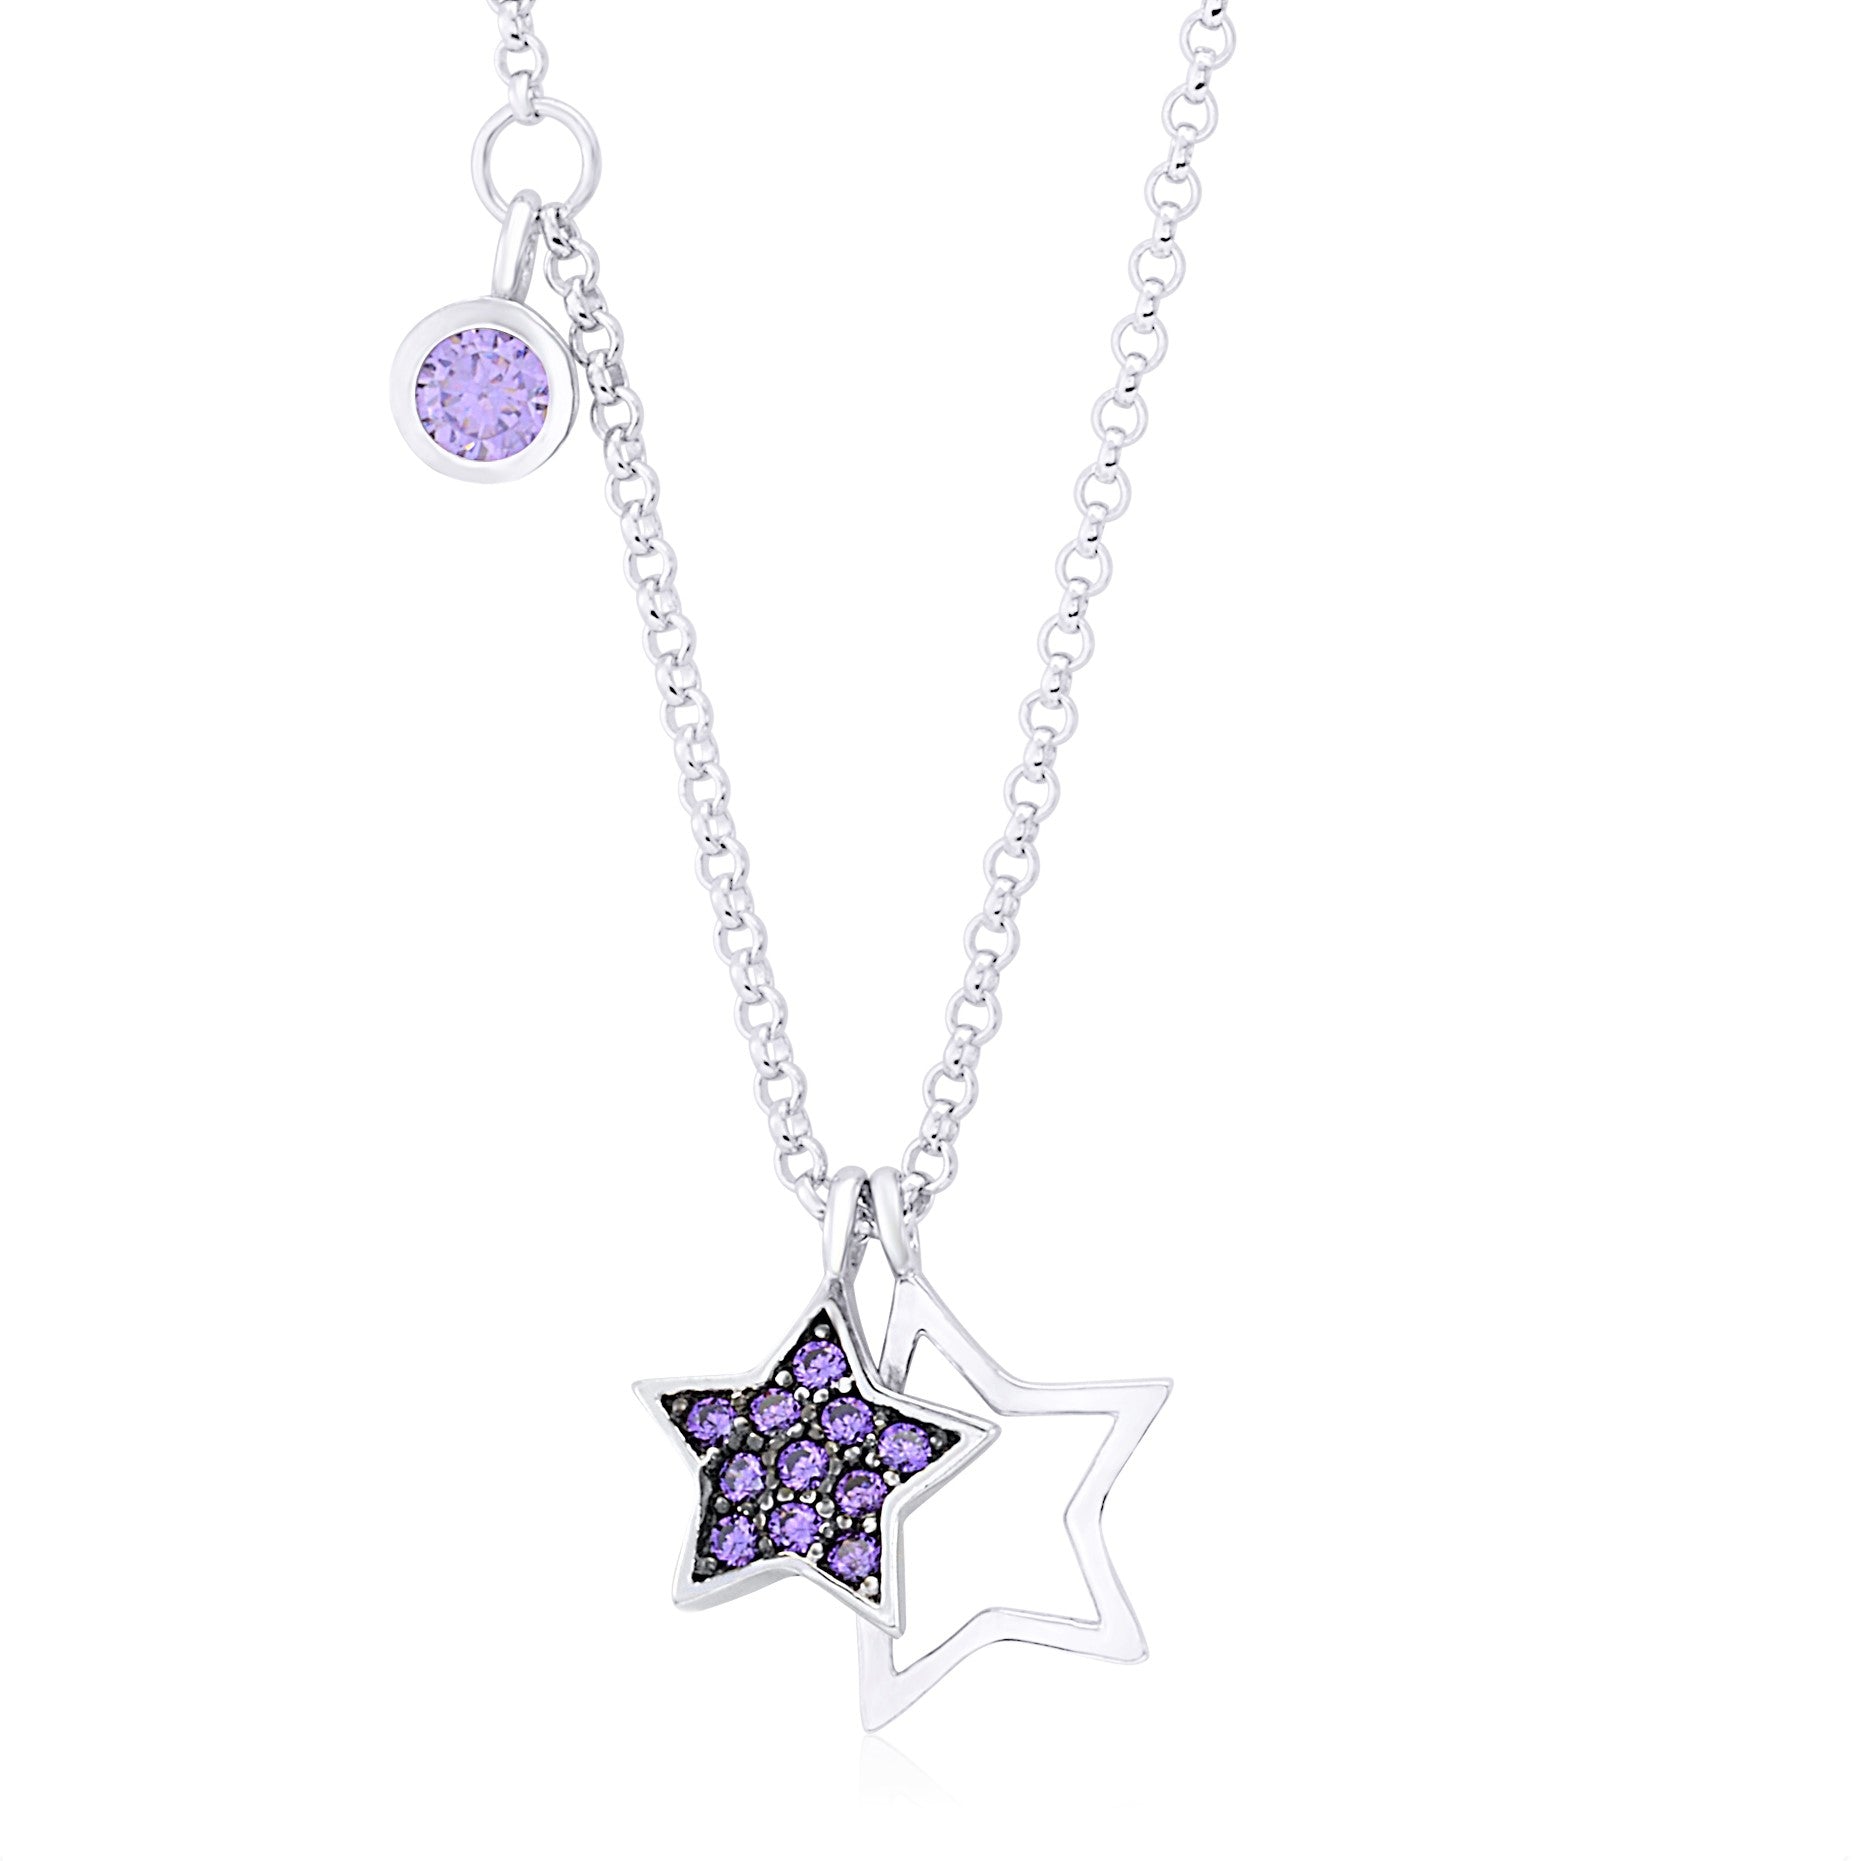 UNICORNJ Sterling Silver 925 Star Charm Pendant Necklace with Pavé Cubic Zirconia on Rolo Chain